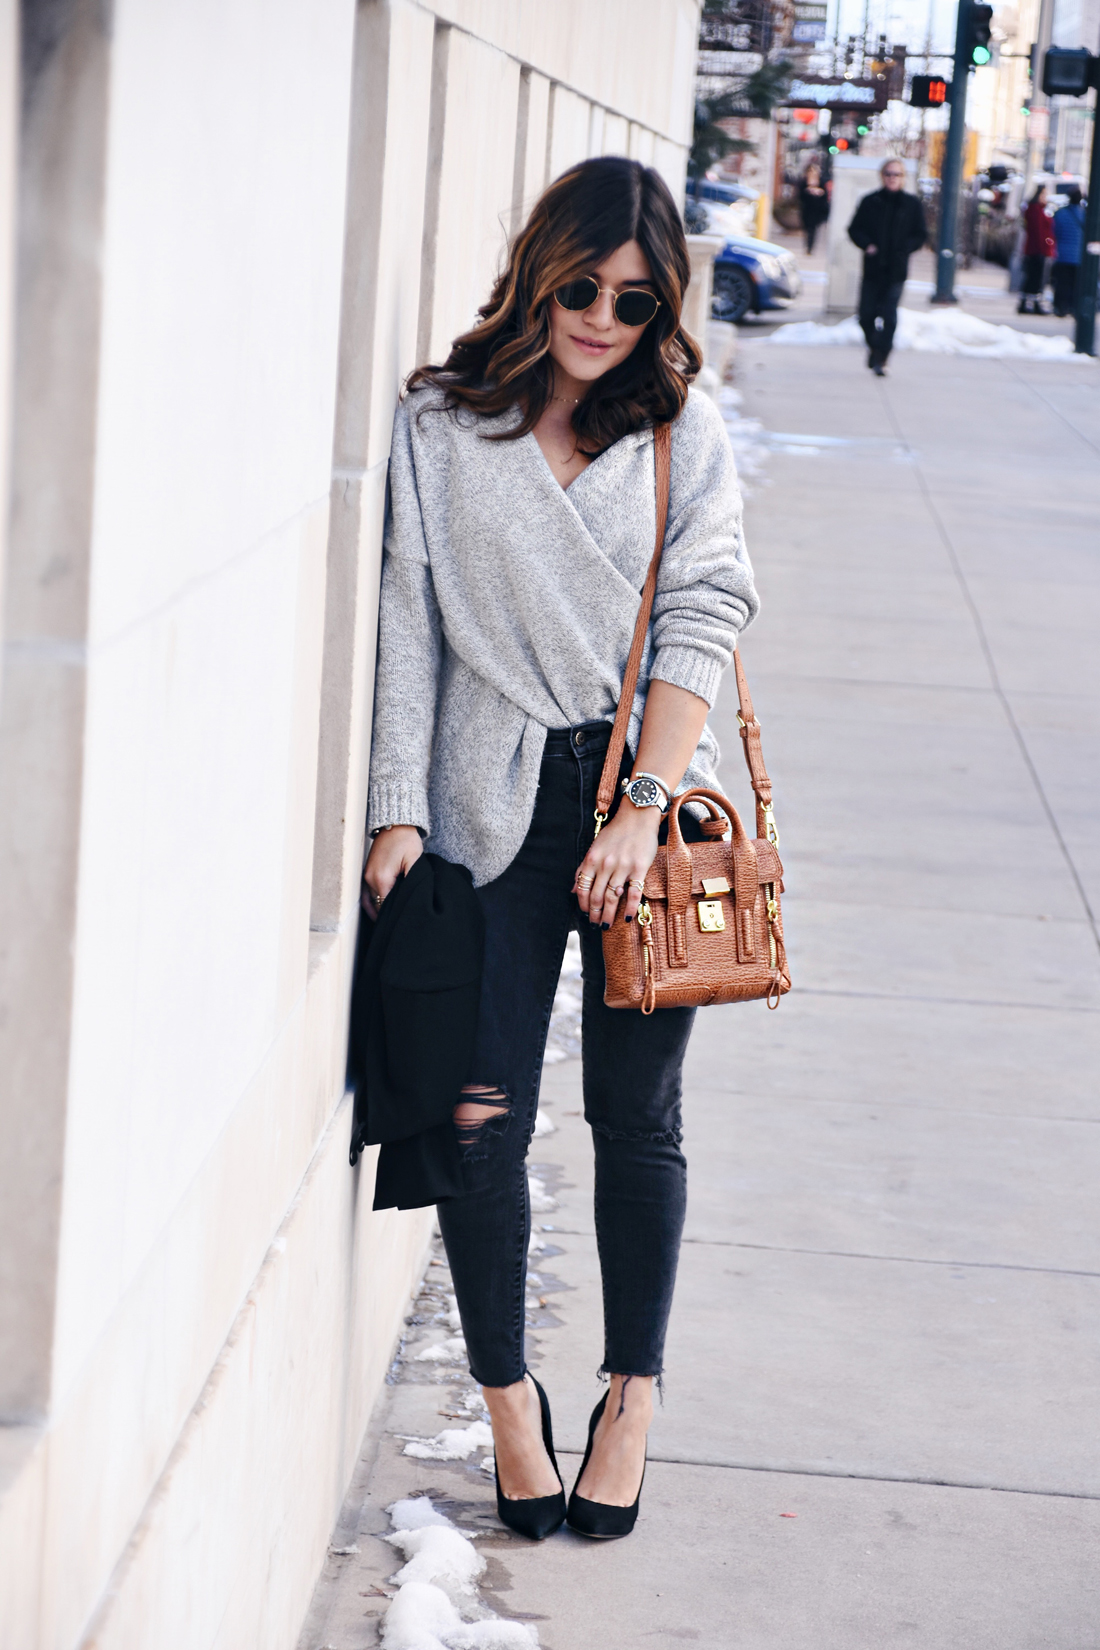 Carolina Hellal of Chic Talk wearing Madewell jeans, Rayban Sunglasses, 3.1 Phillip Lim bag, Steve Madden pumps, and Chicwish cross front sweater